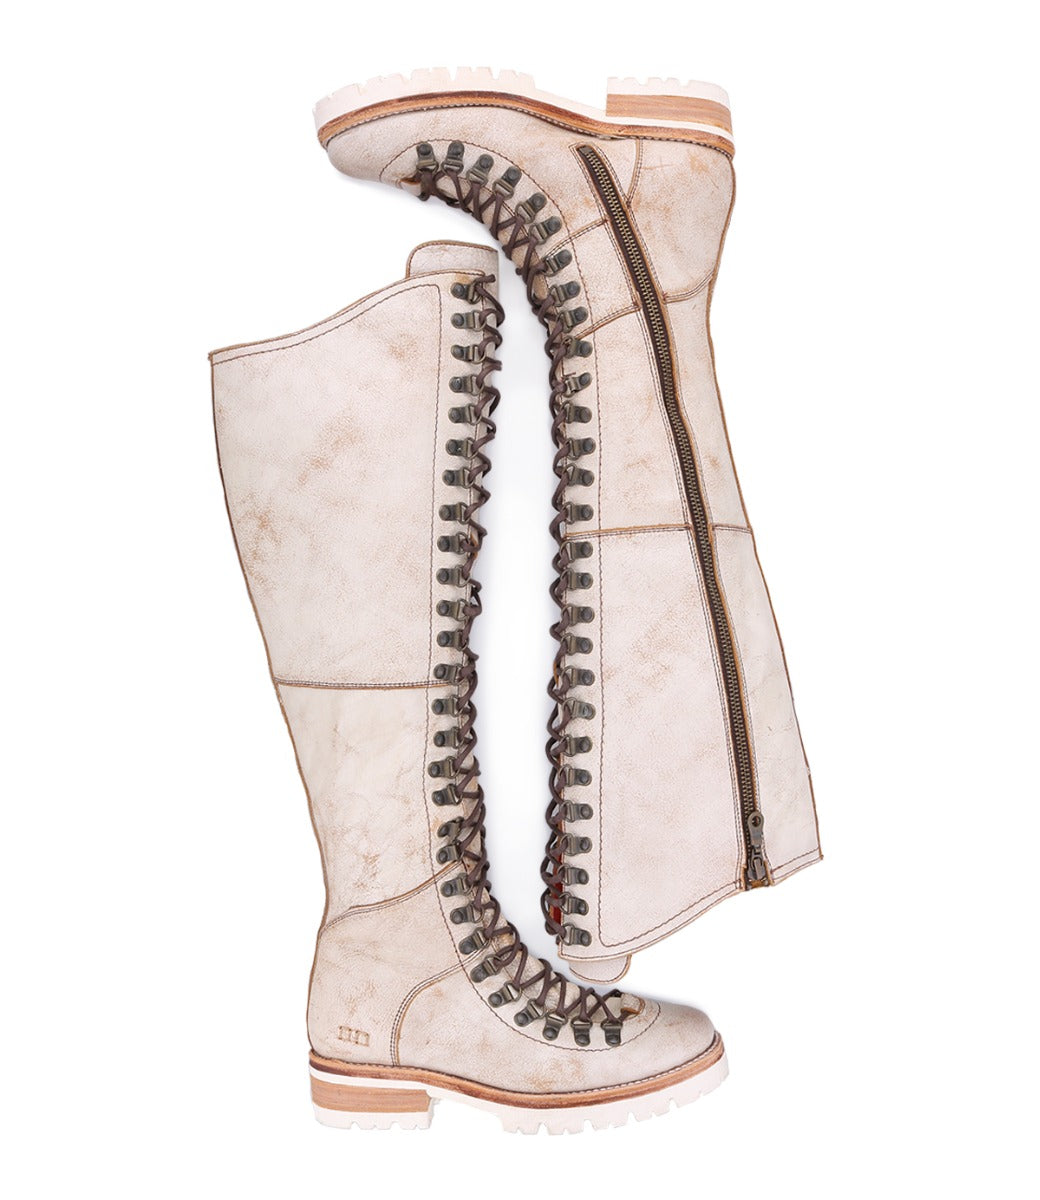 A pair of Lustrous women's boots with laces and zippers from the Bed Stu brand.